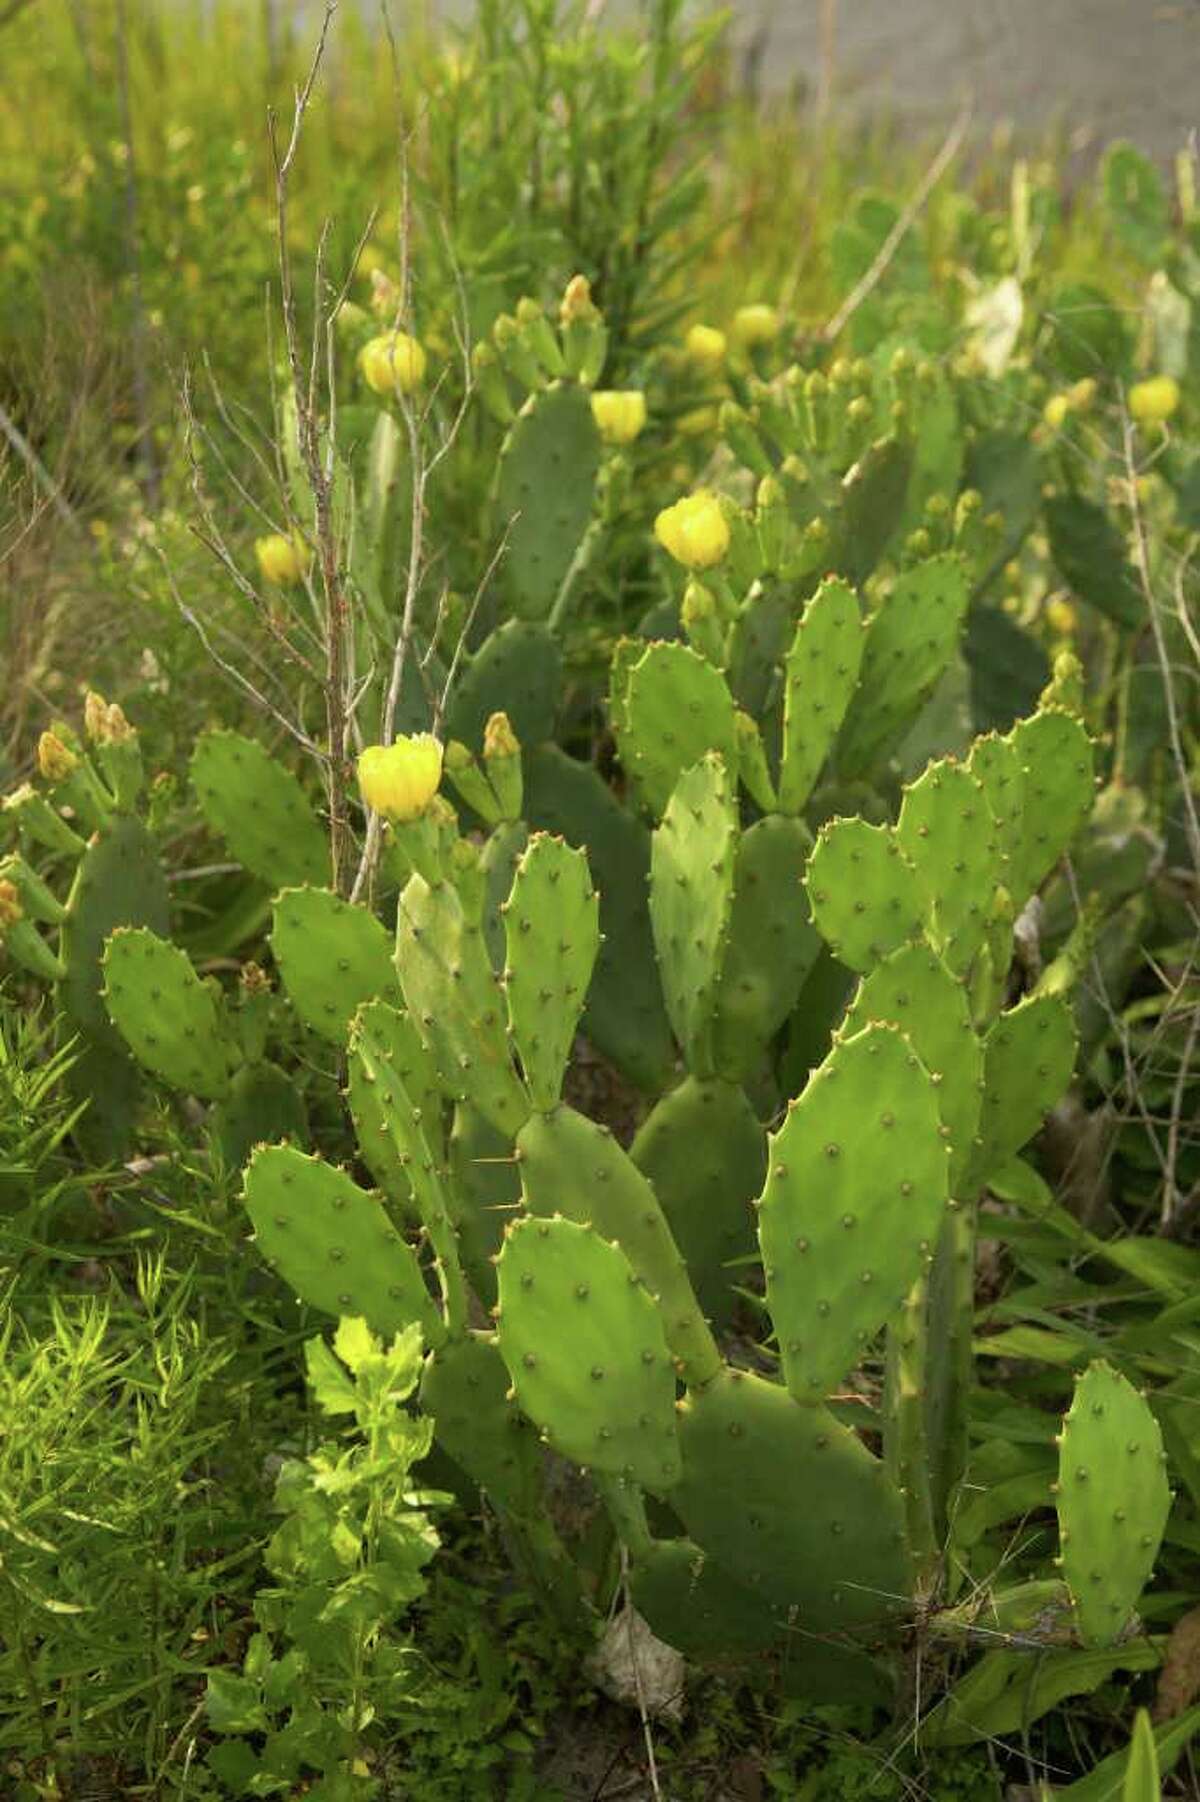 Prickly pear cactus, Opuntia spp., grows throughout the United States, with the greatest diversity in the desert Southwest and Mexico. These species are regarded as extremely important plants, especially in arid and semiarid regions where few plants can be grown, because of their ecological, agricultural, industrial, and cultural value. (Courtesy of USDA)